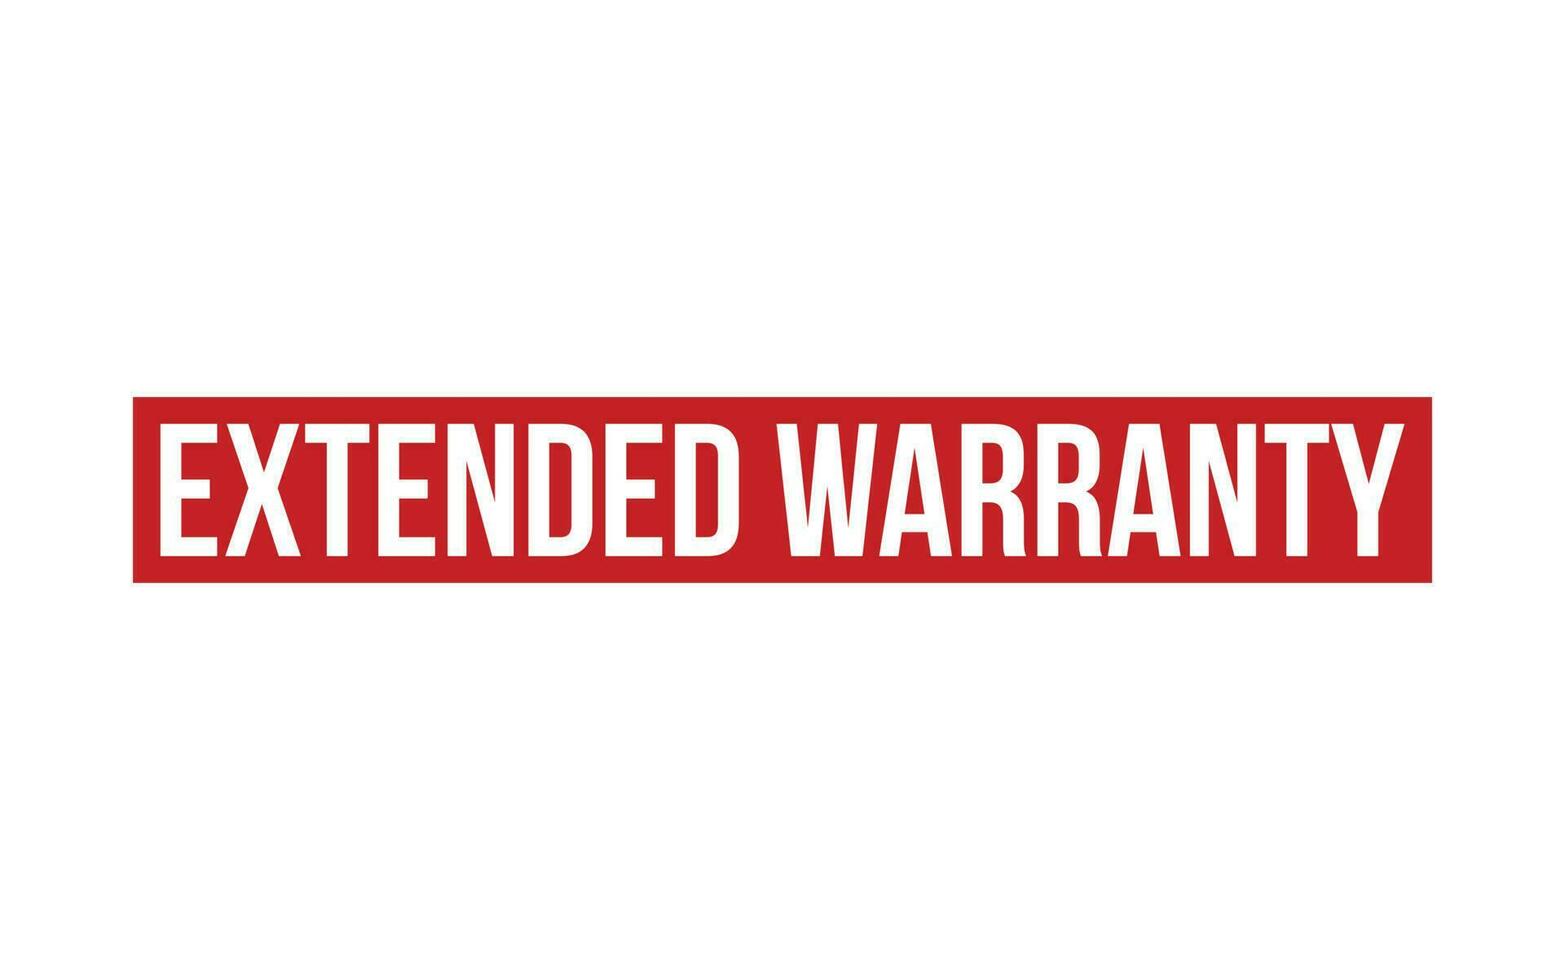 Red Extended Warranty Rubber Stamp Seal Vector